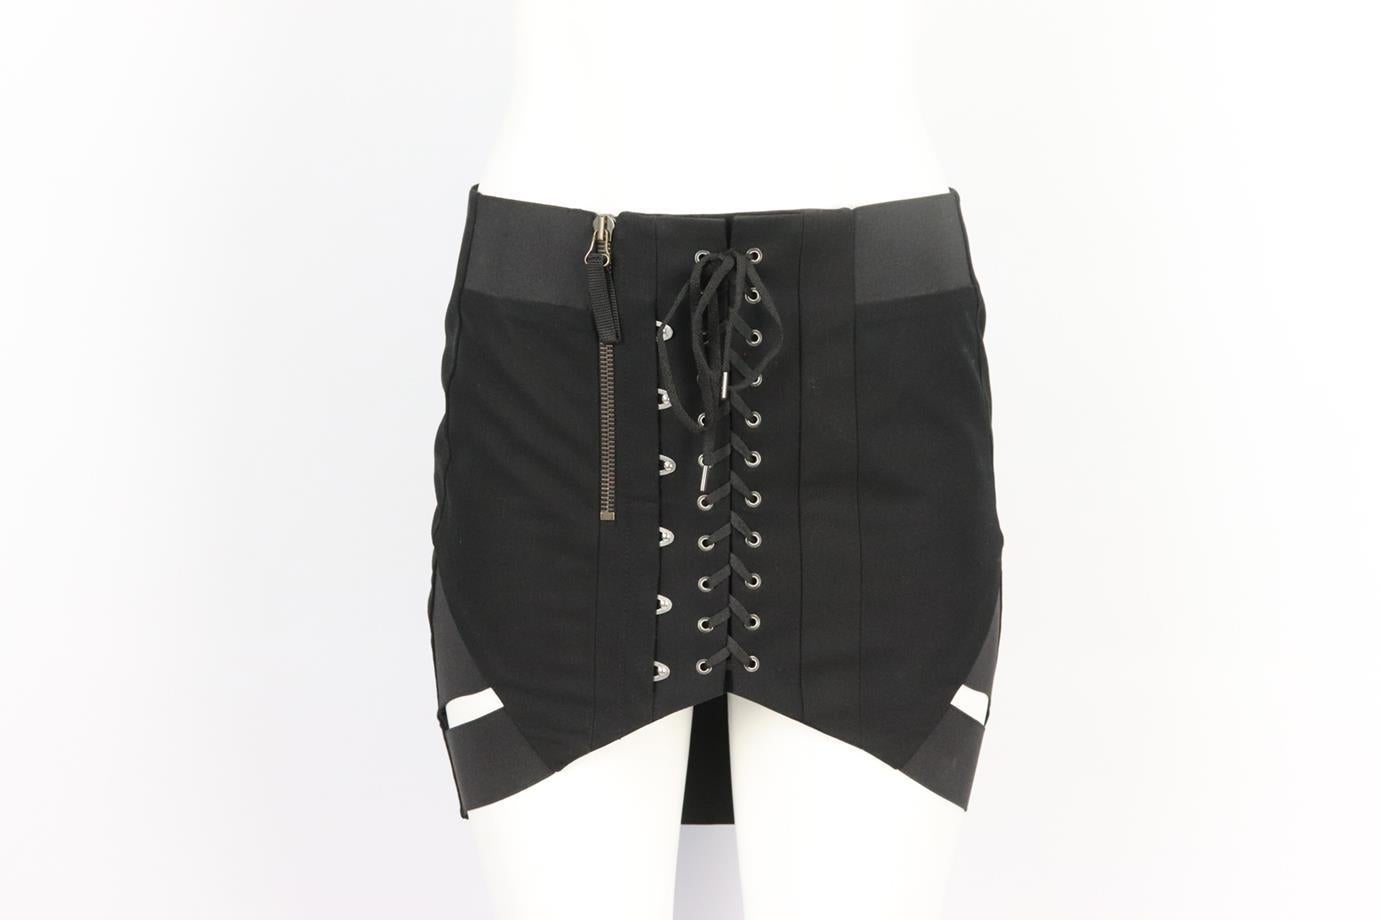 Anthony Vaccarello asymmetric lace up wool mini skirt. Black. Zip fastening at side. 100% Wool; trim: 100% zamac. Size: FR 36 (UK 8, US 4, IT 40). Waist: 30 in. Hips: 34.8 in. Length: 16.4 in. Very good condition - No sign of wear; see pictures.